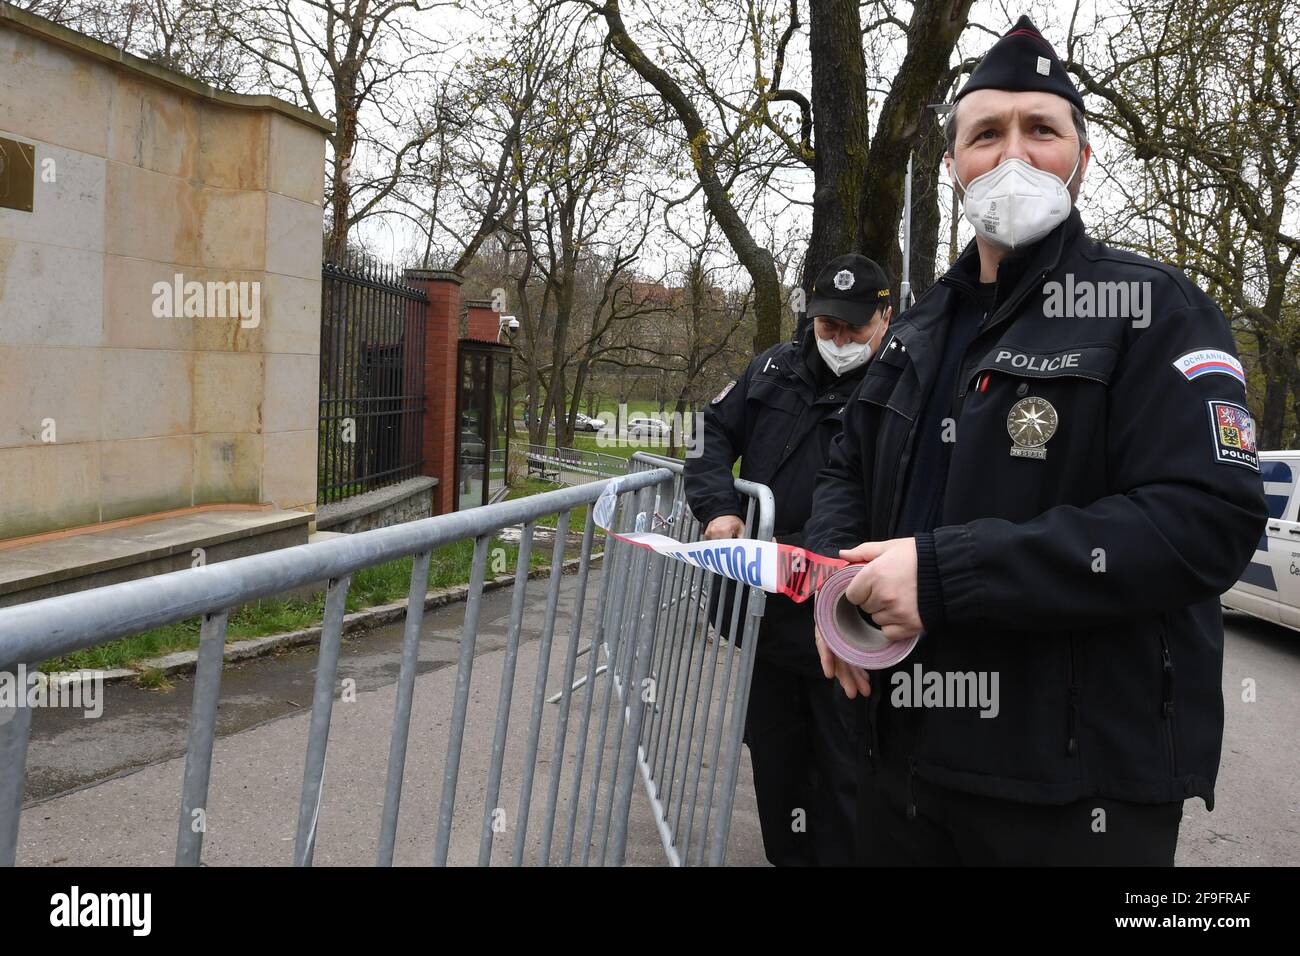 Czech police officers install barriers in front of the building of the Embassy of the Russian Federation in Prague, Czech Republic, on April 18, 2021. Russian secret service GRU members were involved in the explosion of the Czech ammunition store compound in Vrbetice, south Moravia, in 2014, Czech security forces have found out. In reaction, Czechia is expelling 18 members of the Russian embassy staff who were identified as members of Russian secret services. They have to leave Czechia in 48 hours, PM Andrej Babis and Deputy PM Jan Hamacek said on April 17. The night after the announcement of Stock Photo